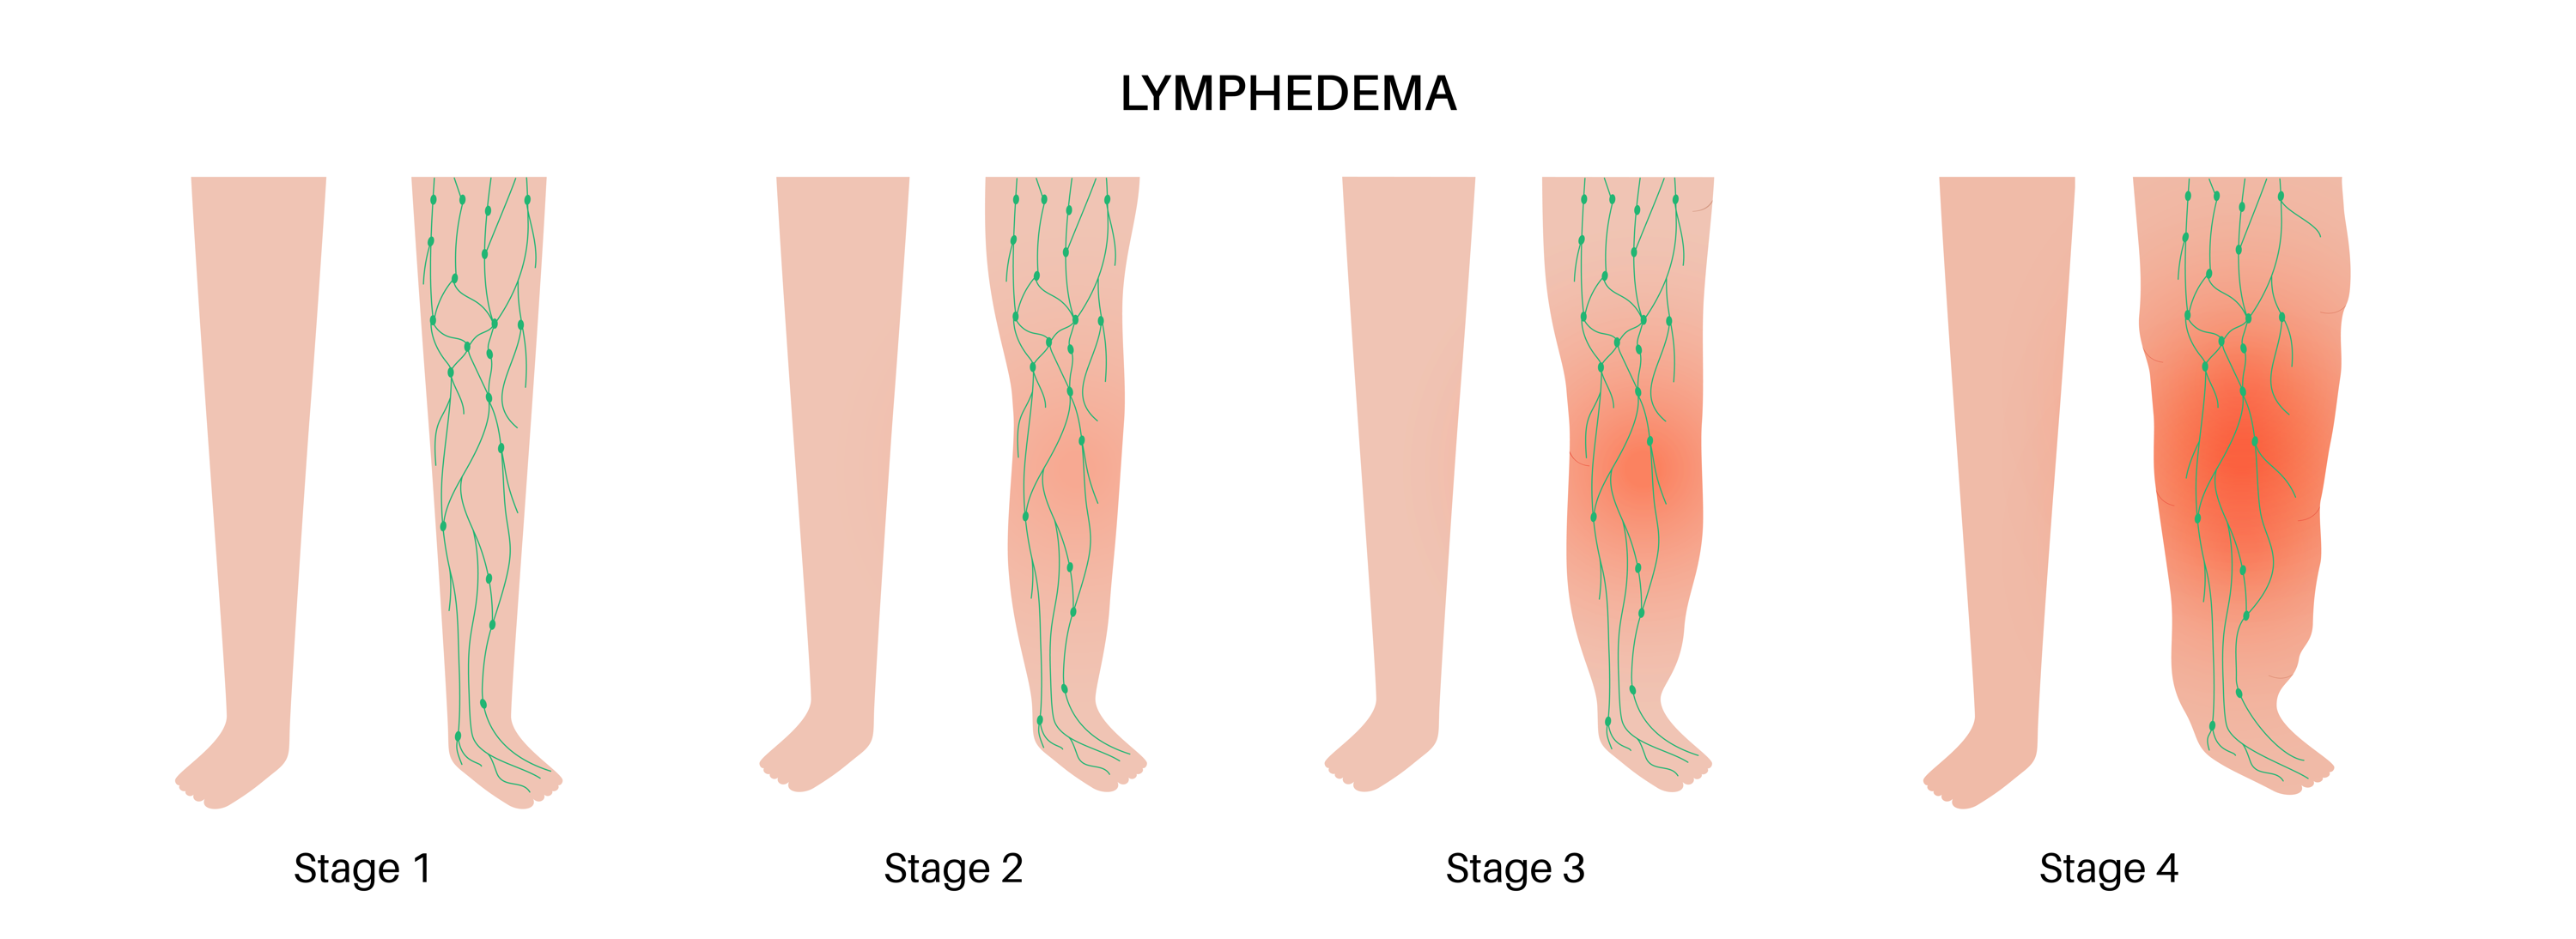 Illustration of stages of lymphedema